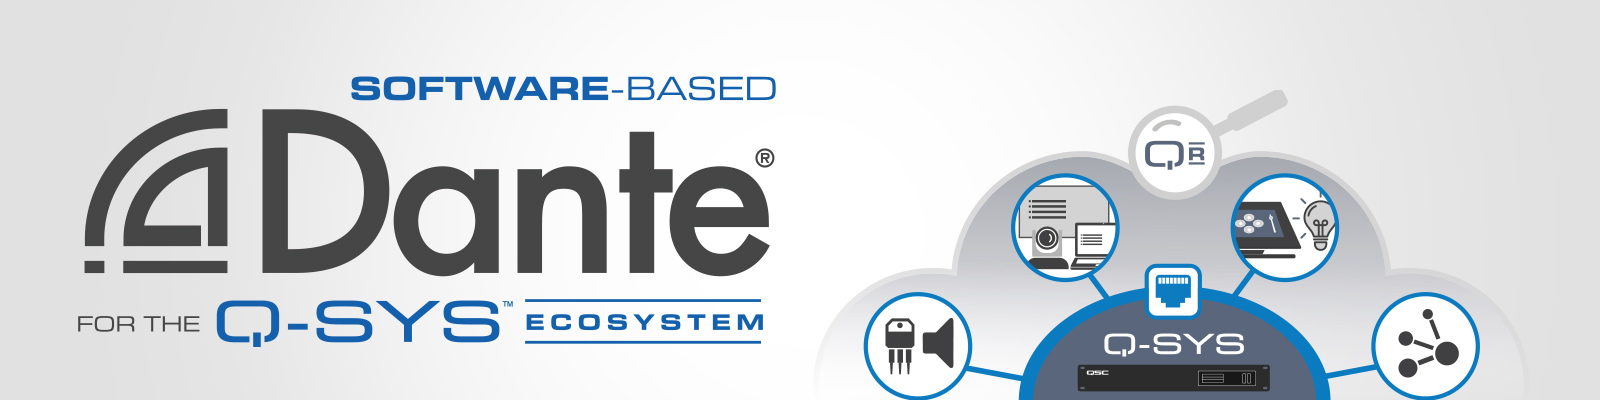 Image text: Software-Based Dante for the Q-SYS ecosystem